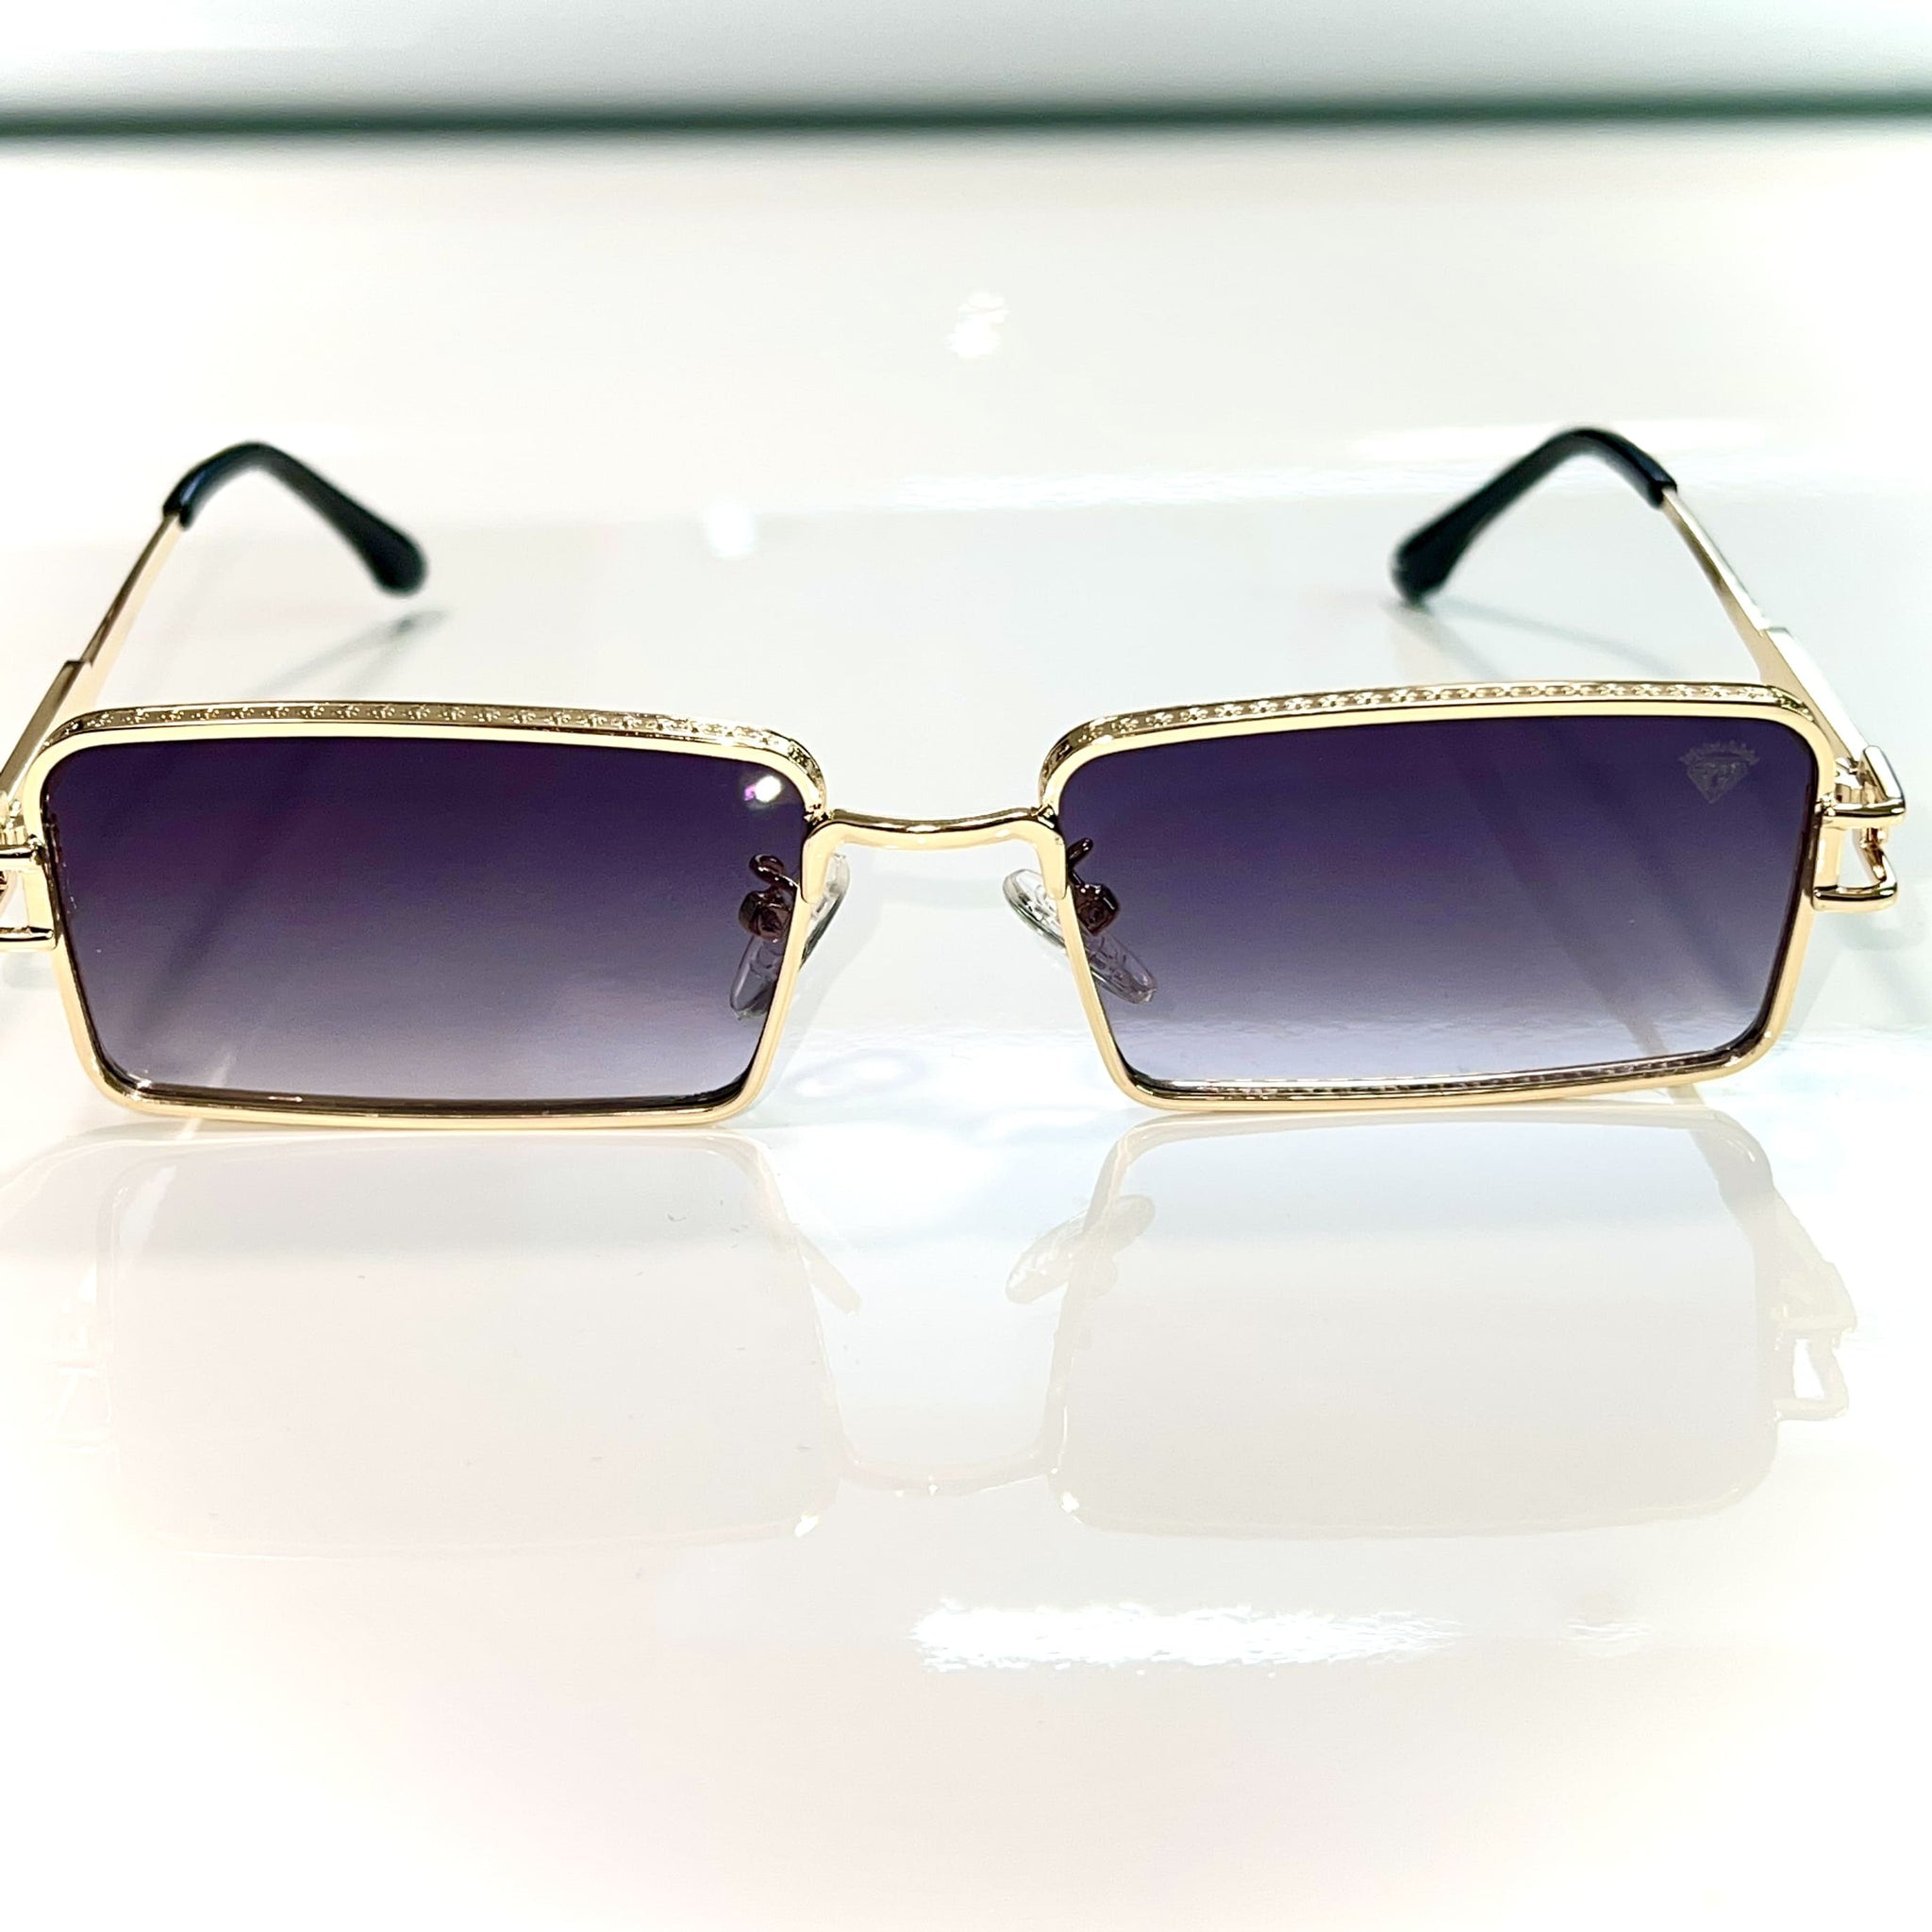 Opulent Glasses - 14 carat gold plated - Black Shade - Sehgal Glasses